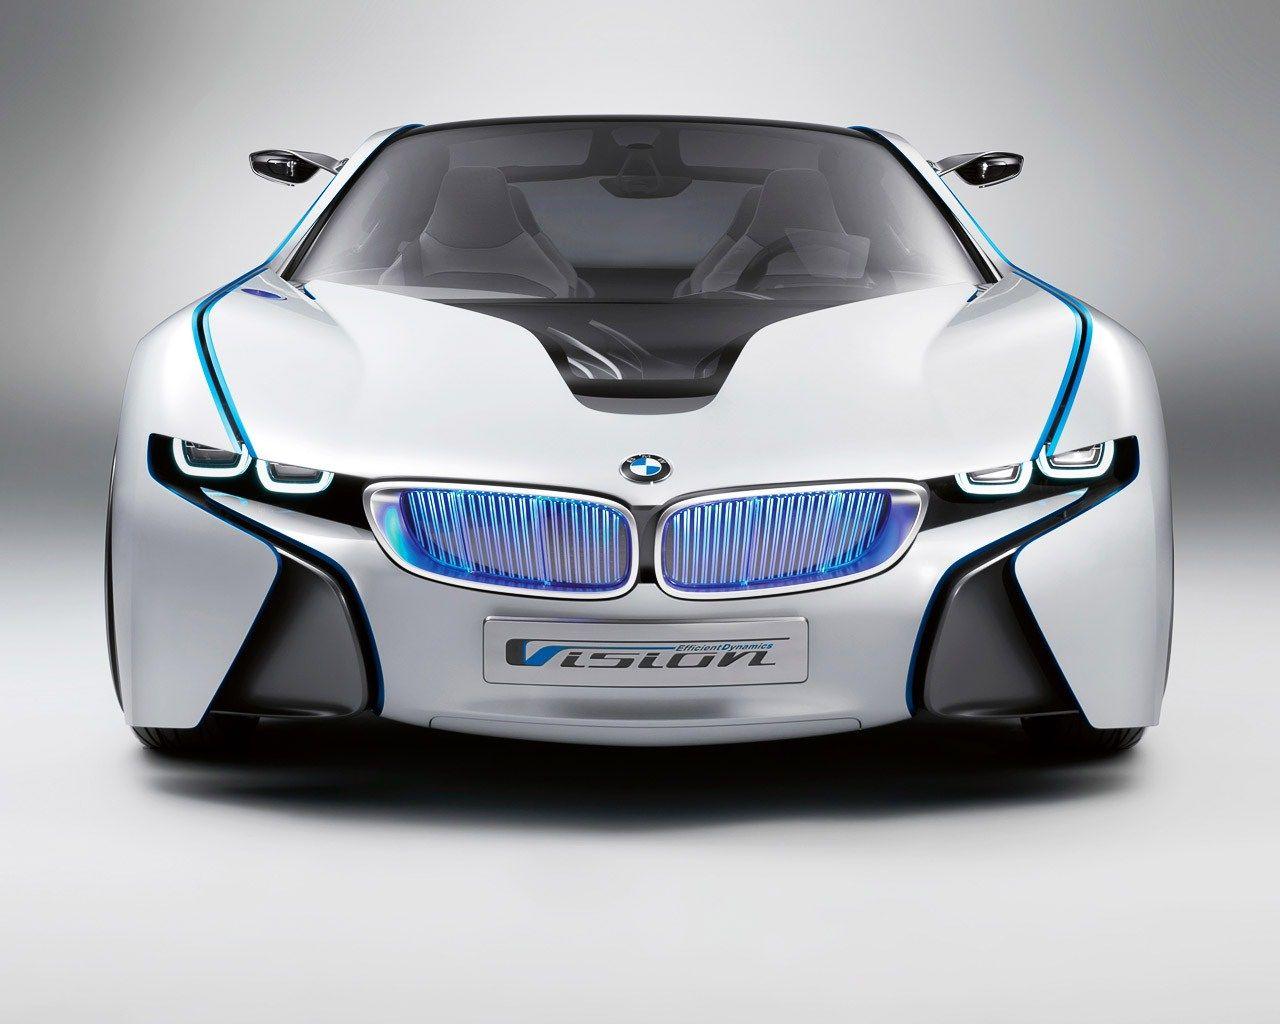 Bmw Sports Cars Wallpapers Top Free Bmw Sports Cars Backgrounds Wallpaperaccess 4355